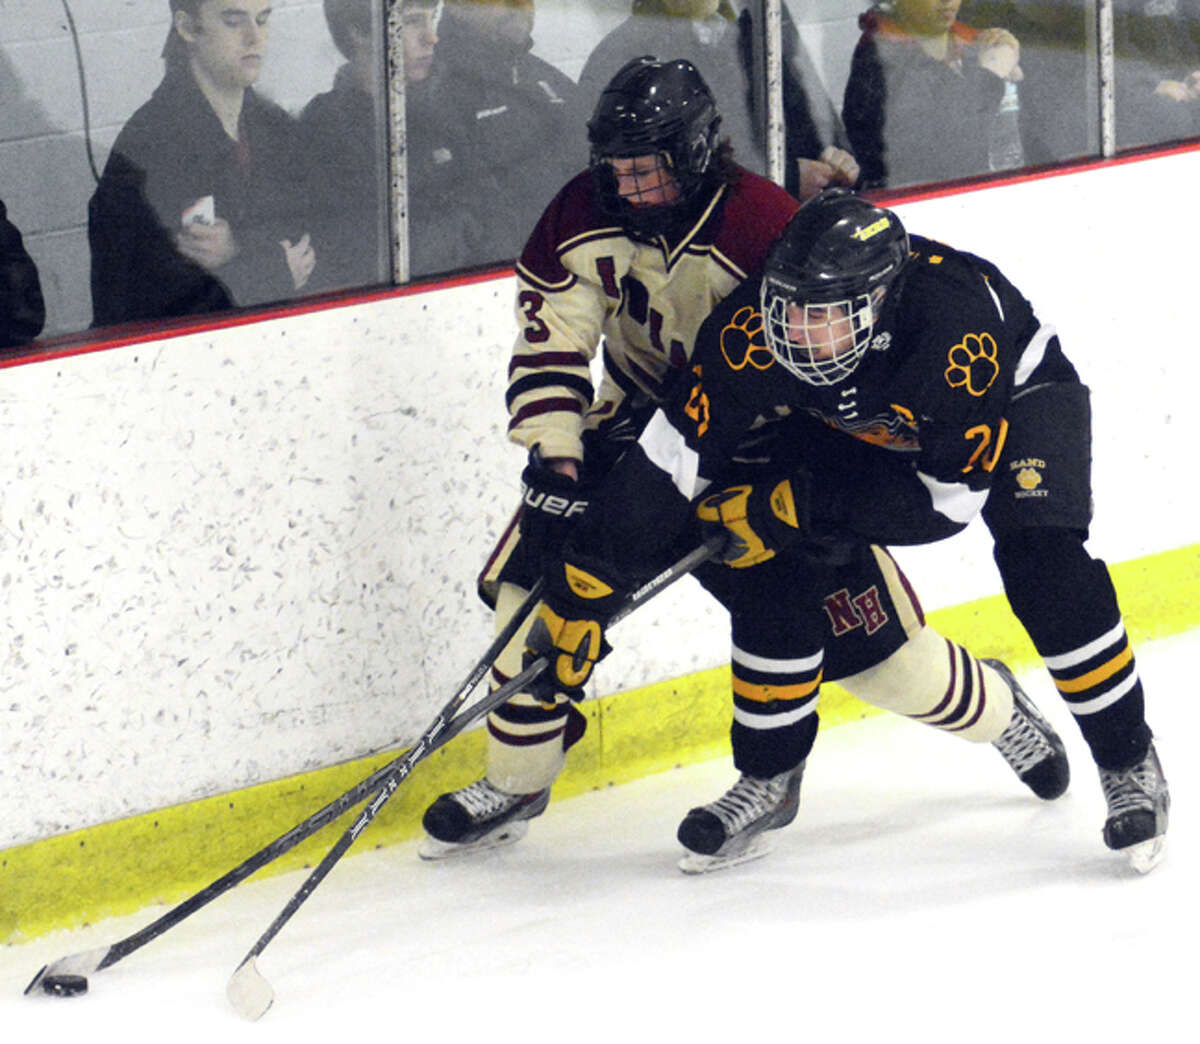 Photo by Dave Phillips/ North Haven’s Tyler Luedee and Hand’s Dan Healey battle for the puck along the boards during the Tigers’ 4-2 victory Friday night at the Northford Ice Pavilion.